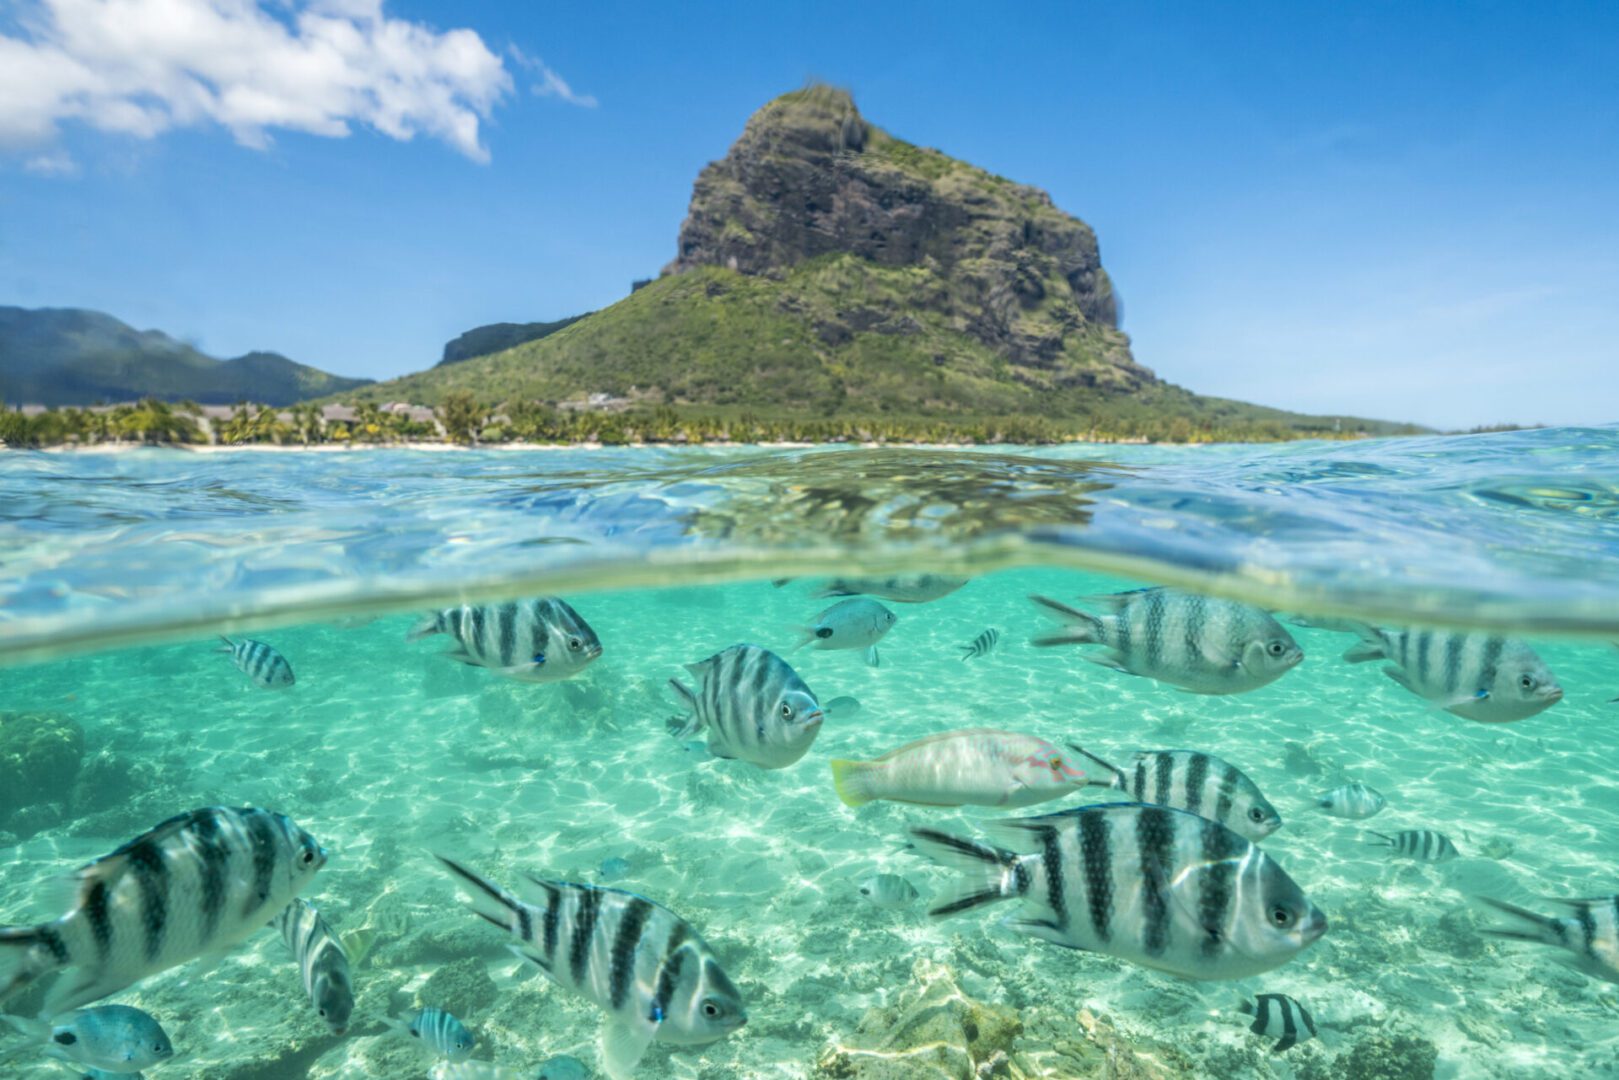 Striped tropical fish swimming under waves along coral reef, Le Morne Brabant, Black River district, Indian Ocean, Mauritius